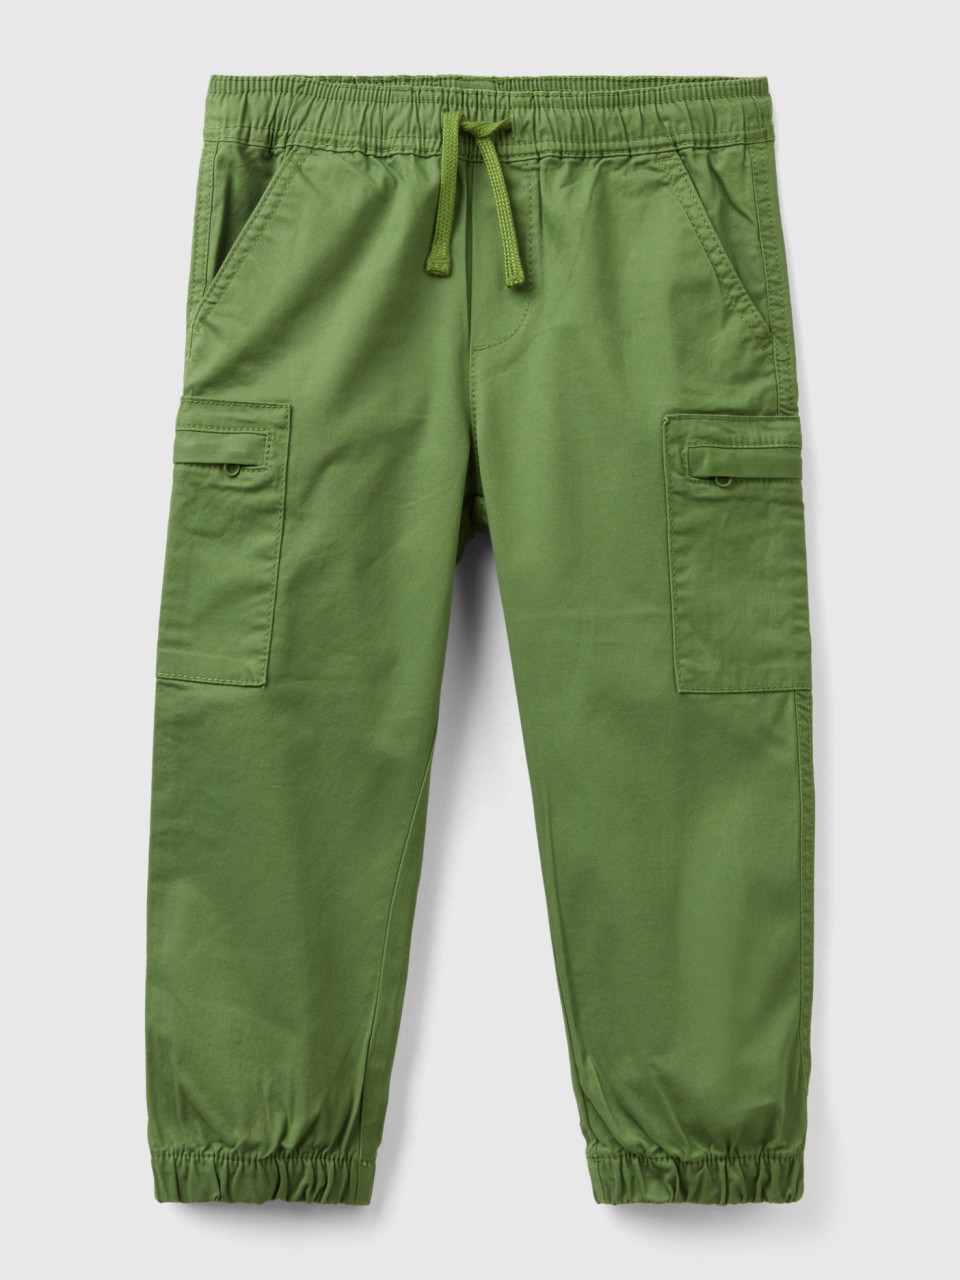 Benetton, Cargo Trousers With Drawstring, Military Green, Kids